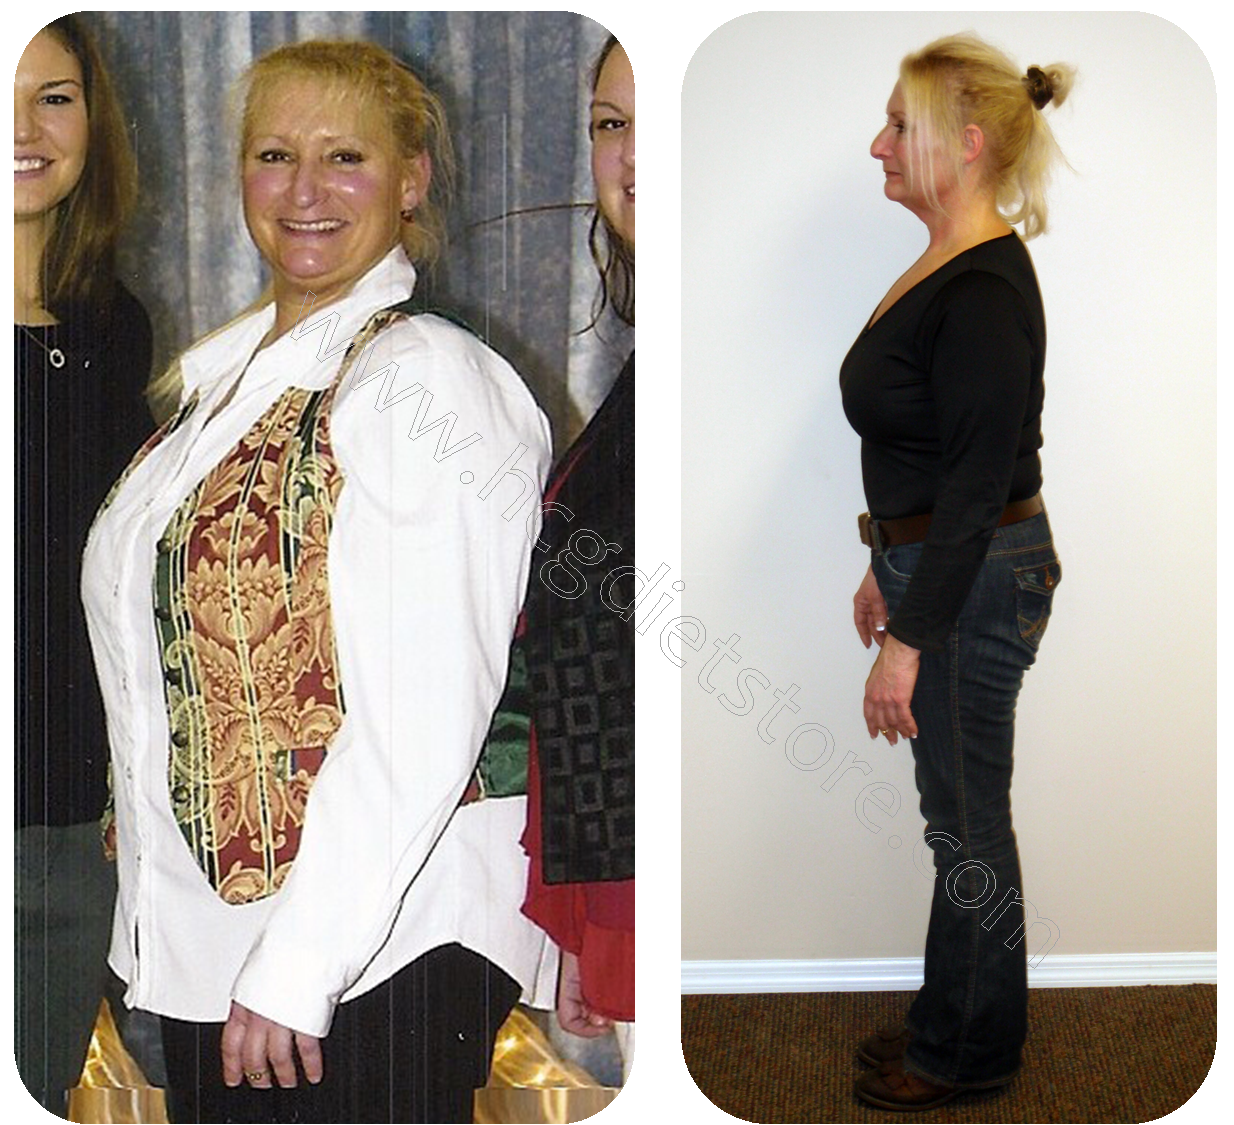 hcg diet before and after, hcg before and after, hcg weight loss before and after, before and after pictures for HCG